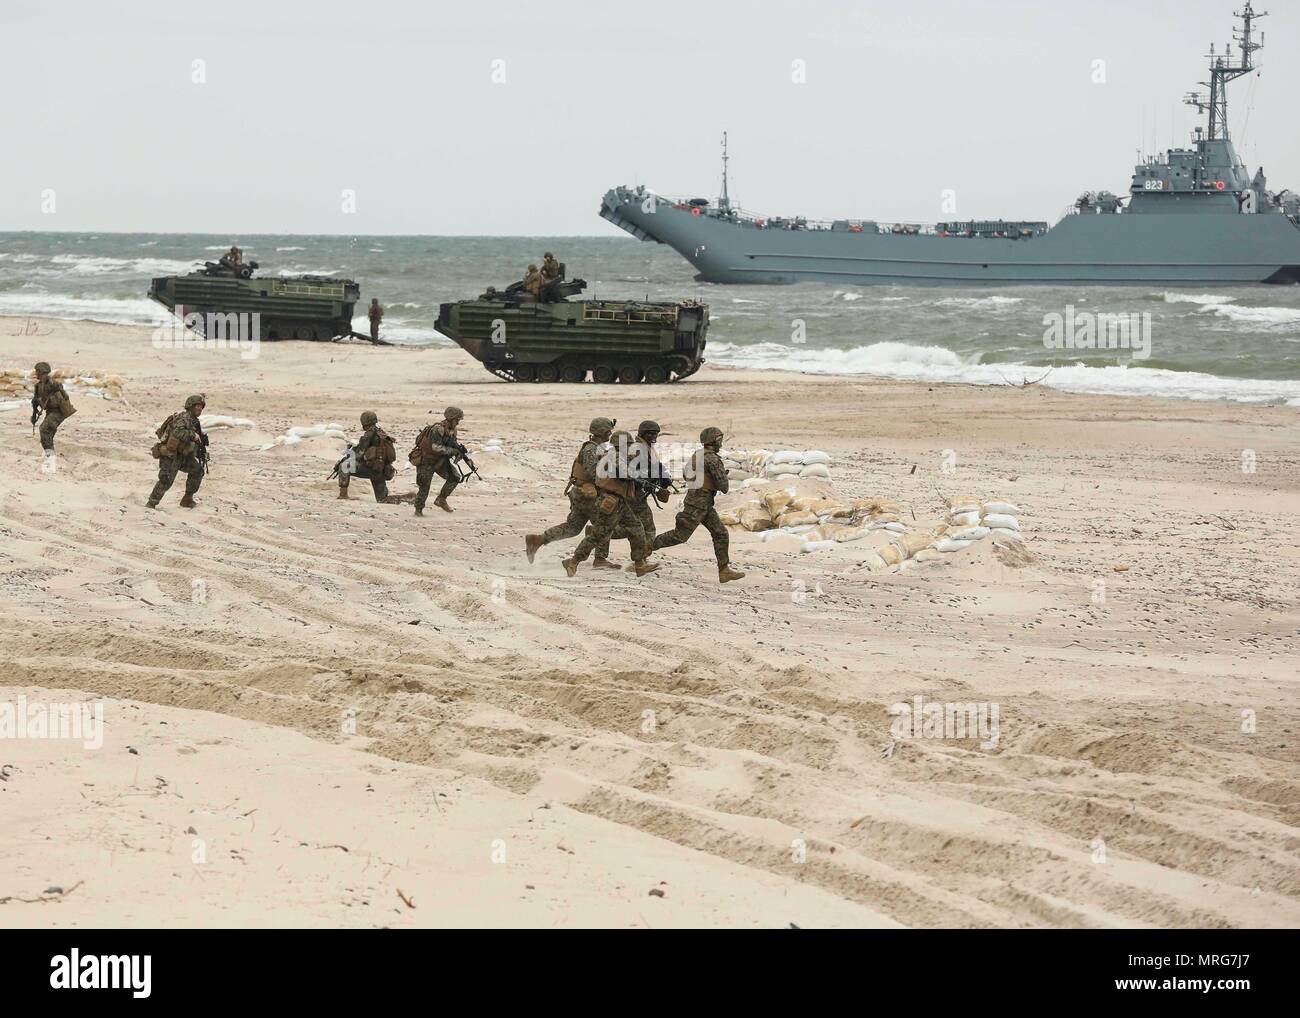 170614-N-PF515-010  USTKA, Poland (June 14, 2017) U.S. Marines assigned to Marine Forces Europe-Africa participate in an amphibious landing demonstration during exercise BALTOPS 2017. The premier annual maritime-focused exercise is conducted in the Baltic region and is one of the largest exercises in Northern Europe.  (U.S. Navy photo by Chief Mass Communication Specialist America A. Henry/Released) Stock Photo